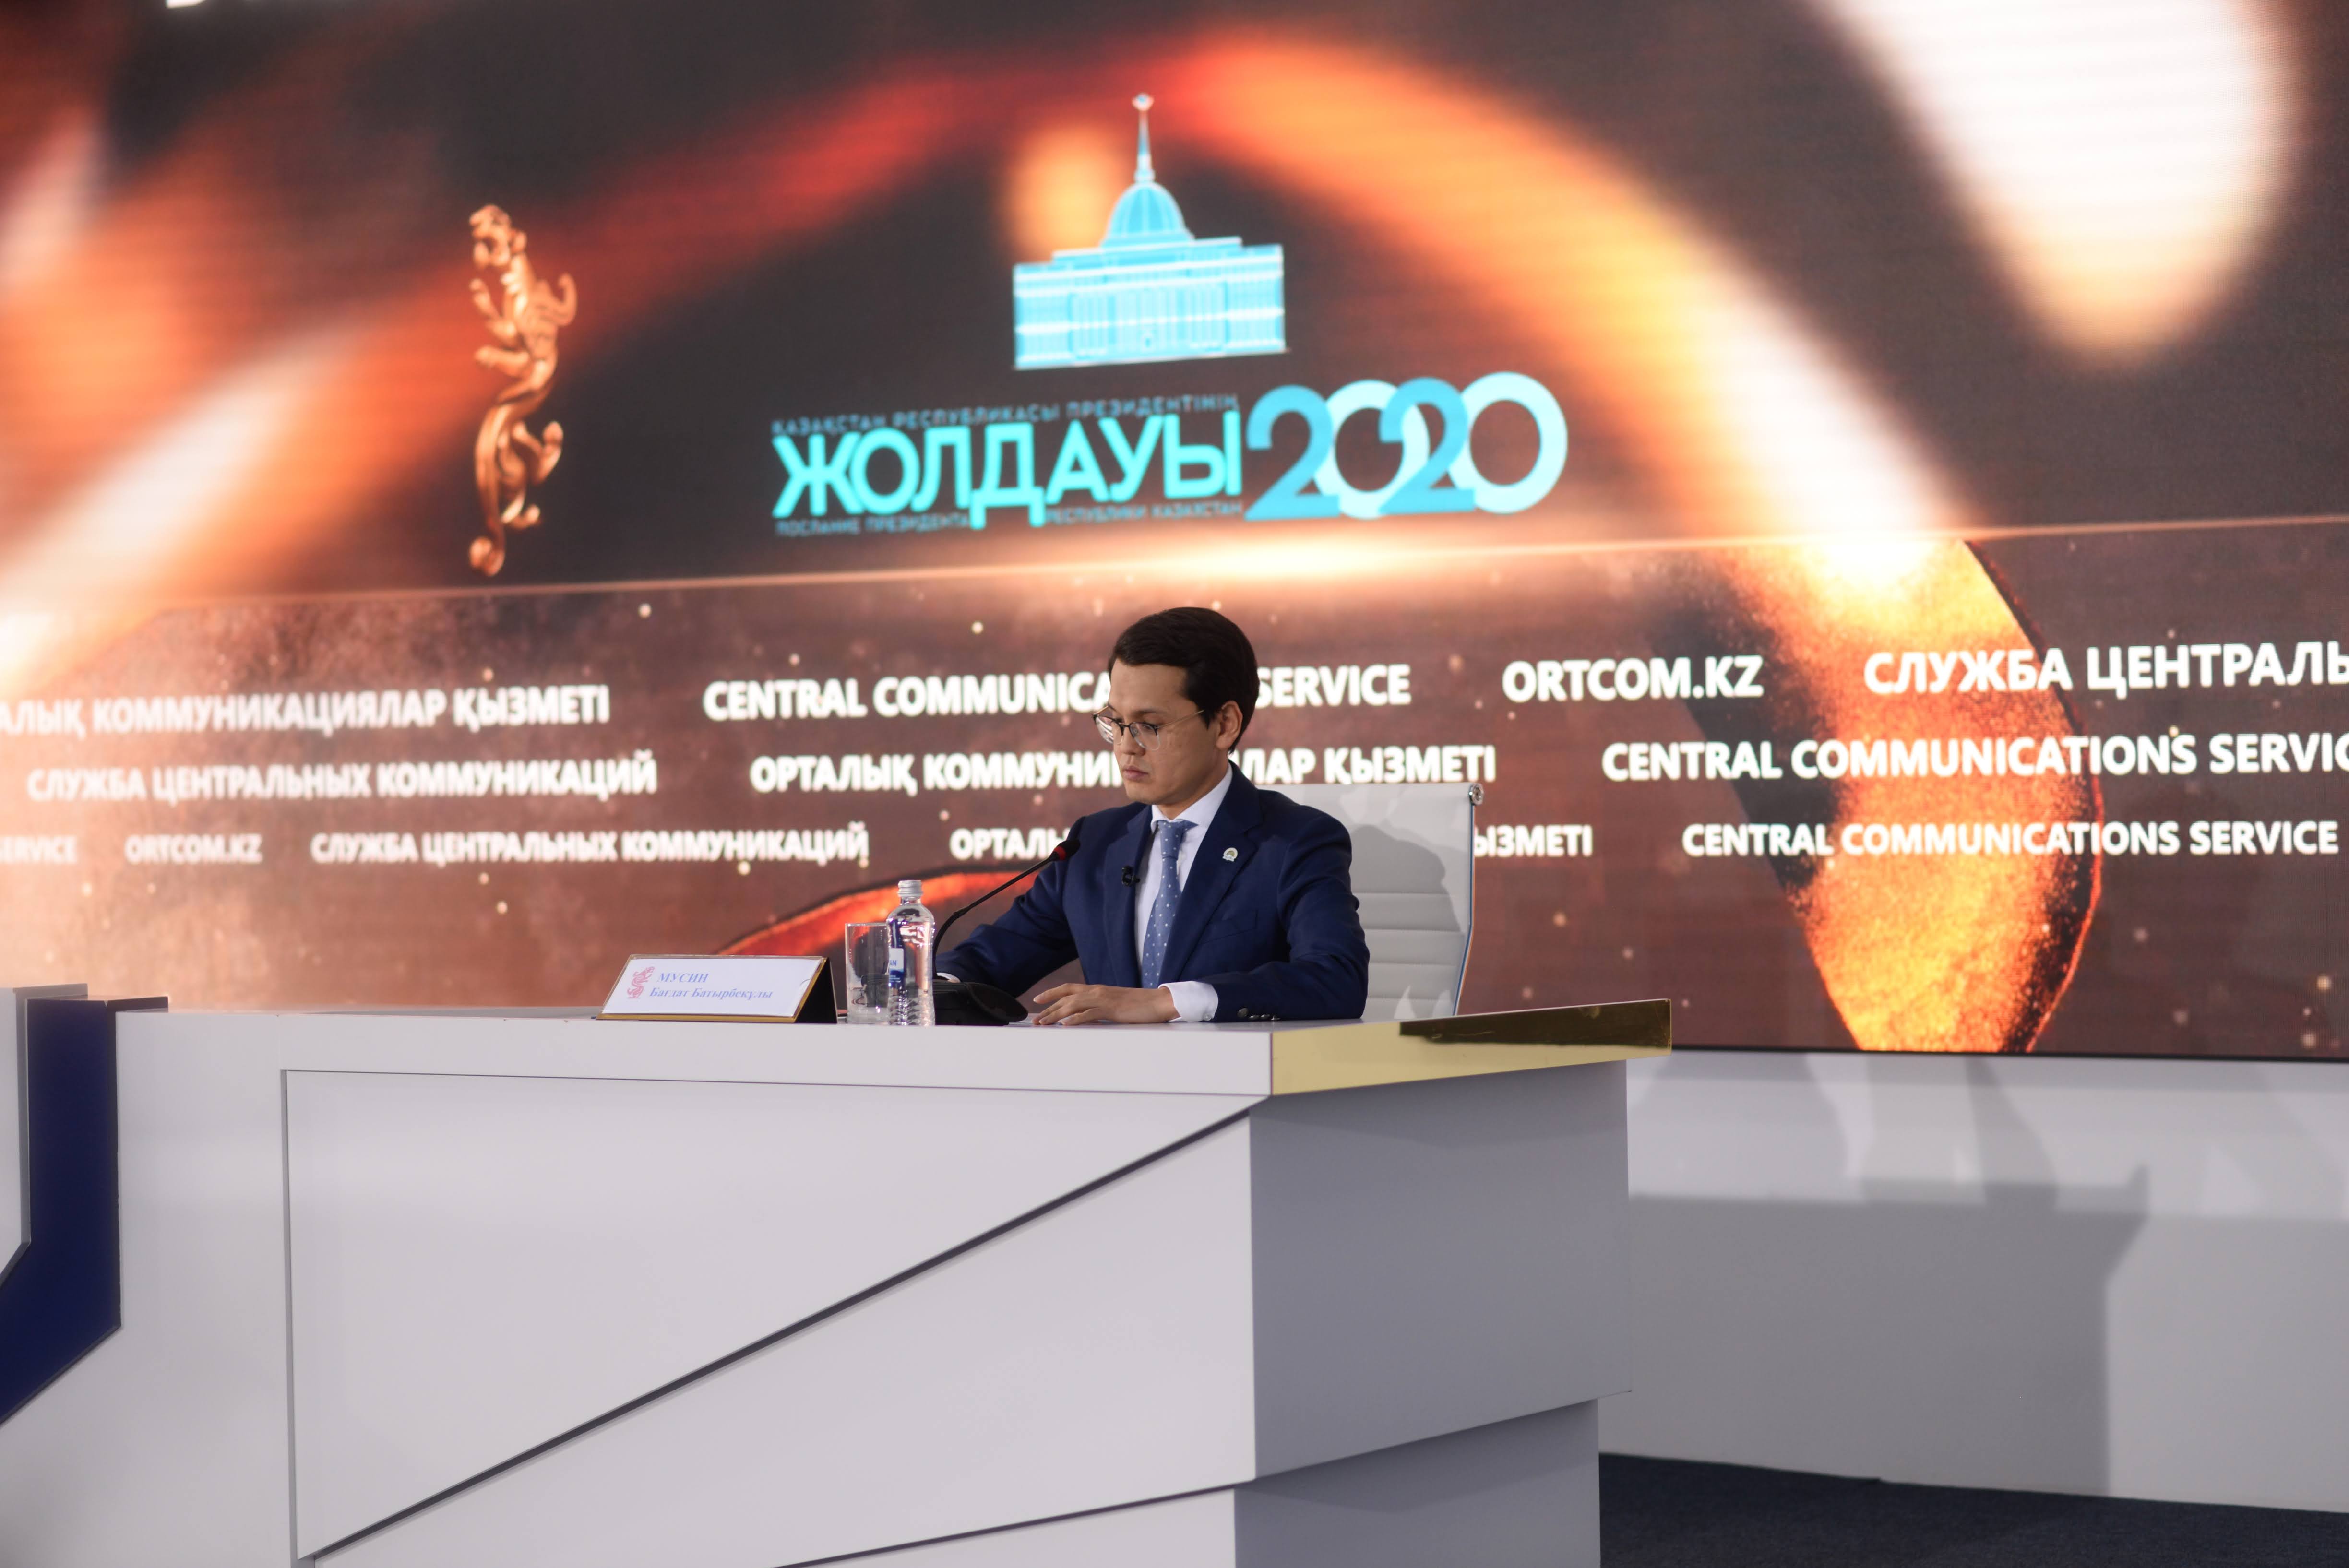 Digitalization is a basic element of all the reforms as well as new capabilities for modern Kazakhstan